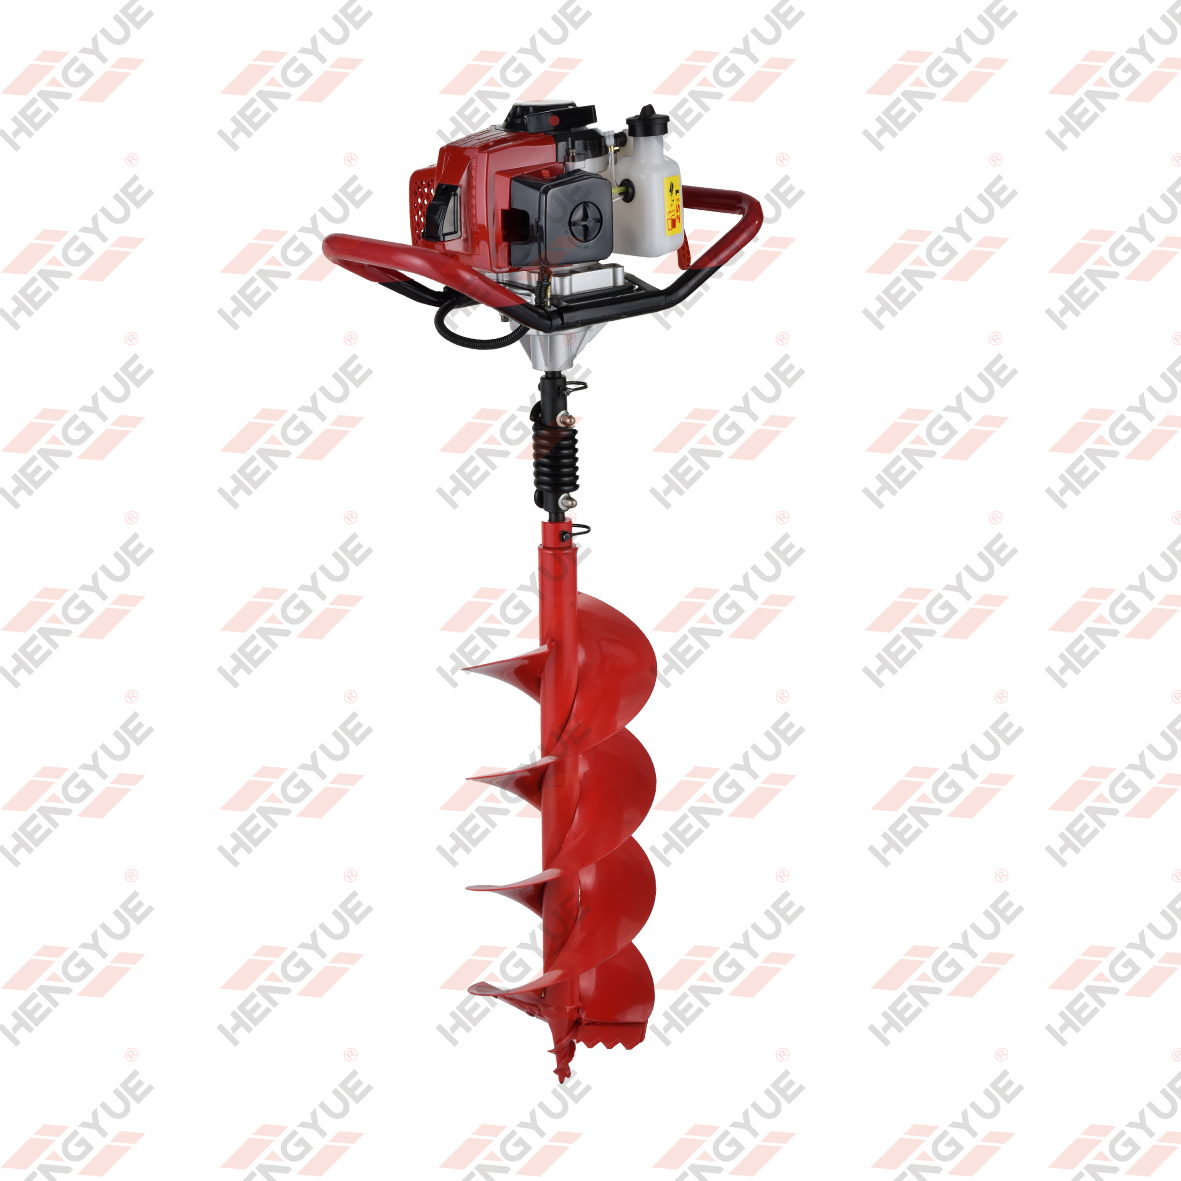 68cc Engine Power Earth Auger 